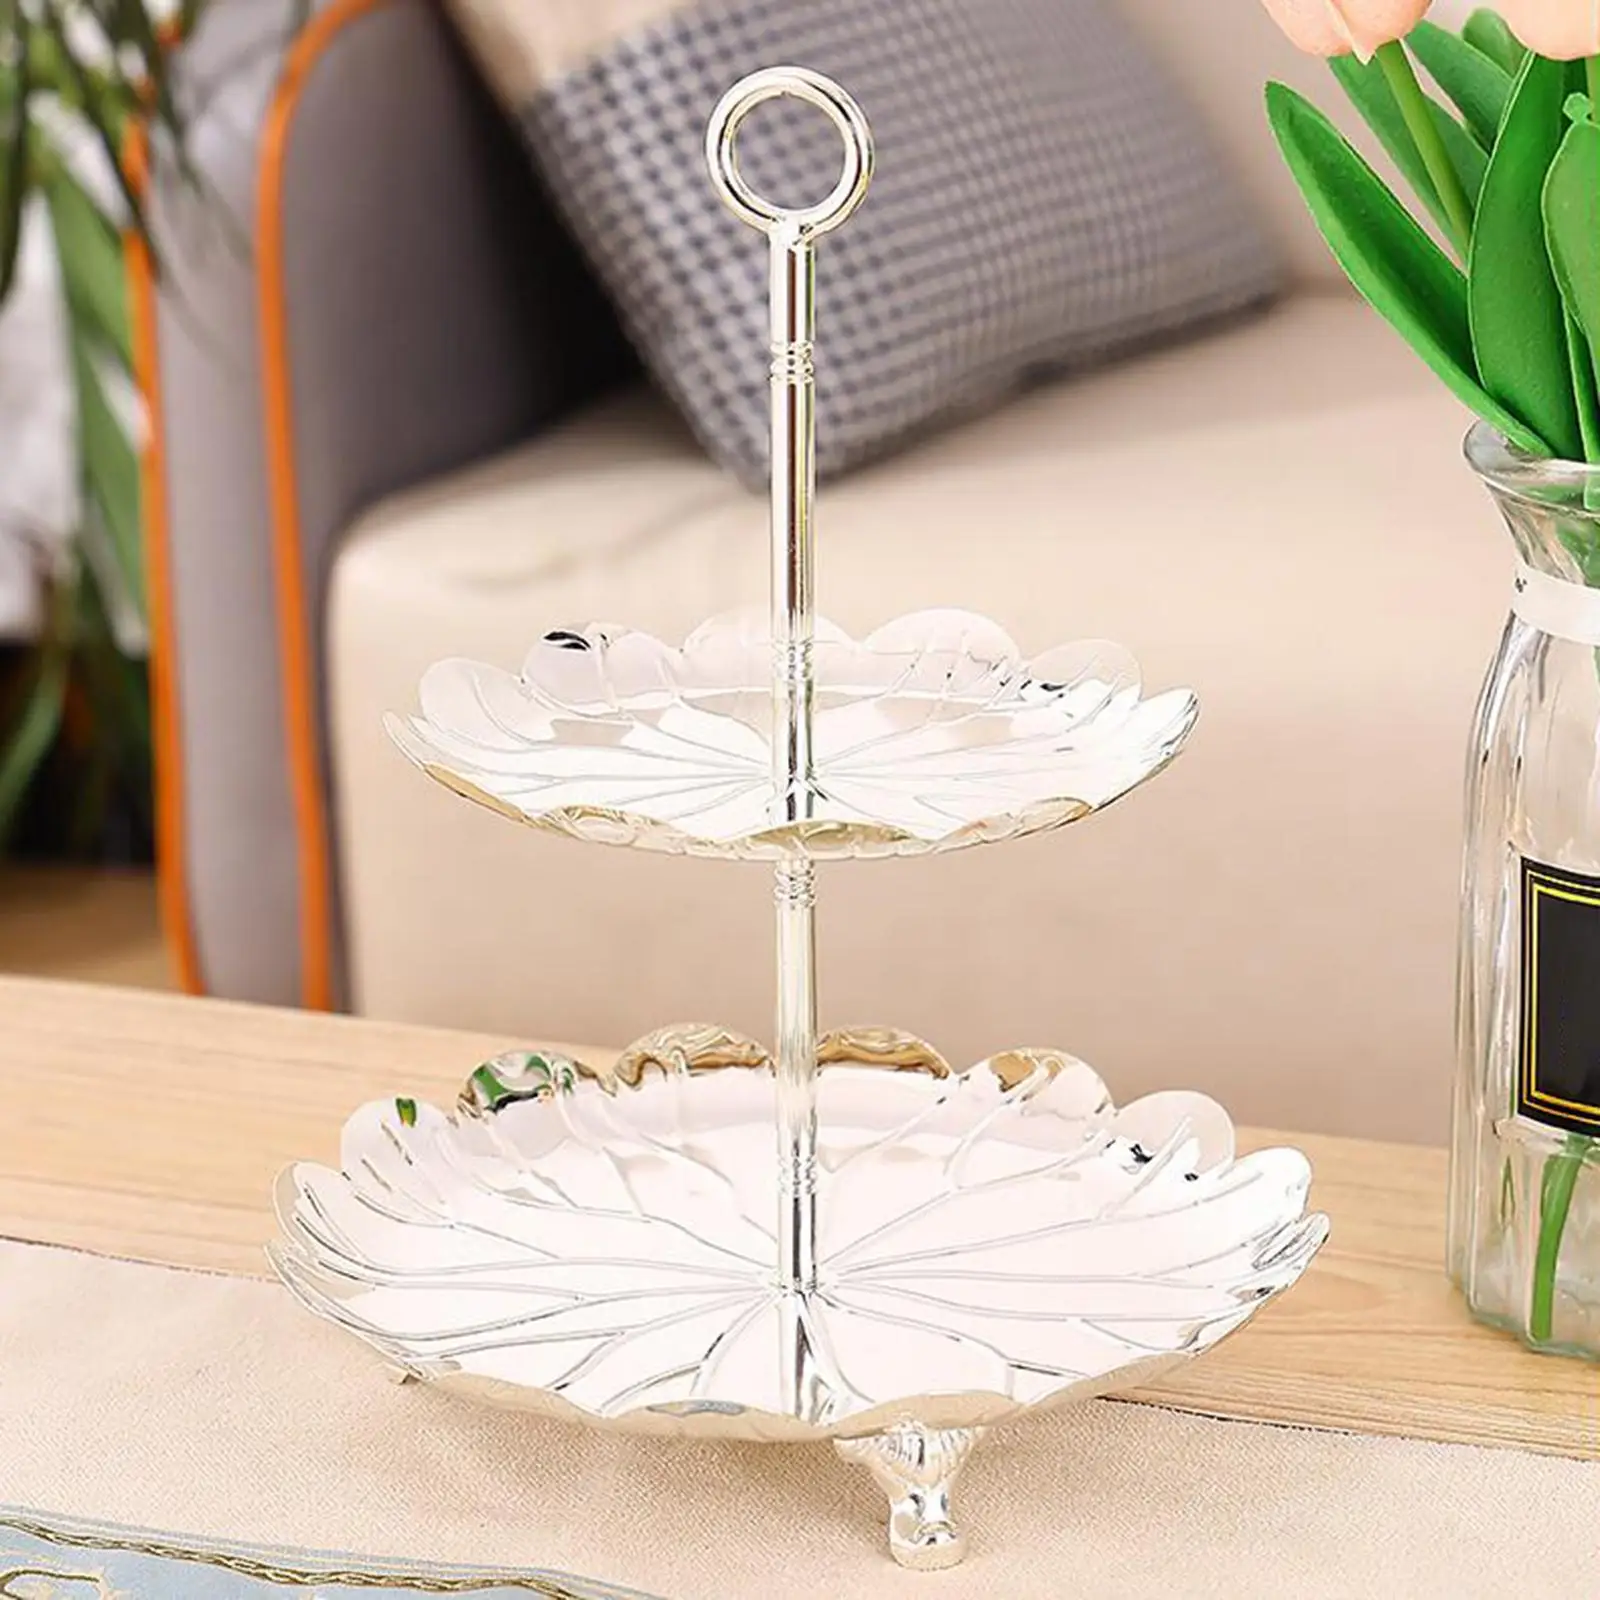 Round Metal Tiered Fruit Serving Stand Dessert Stand Premium Material Durable Polished Elegant Easily Clean Serving Tray